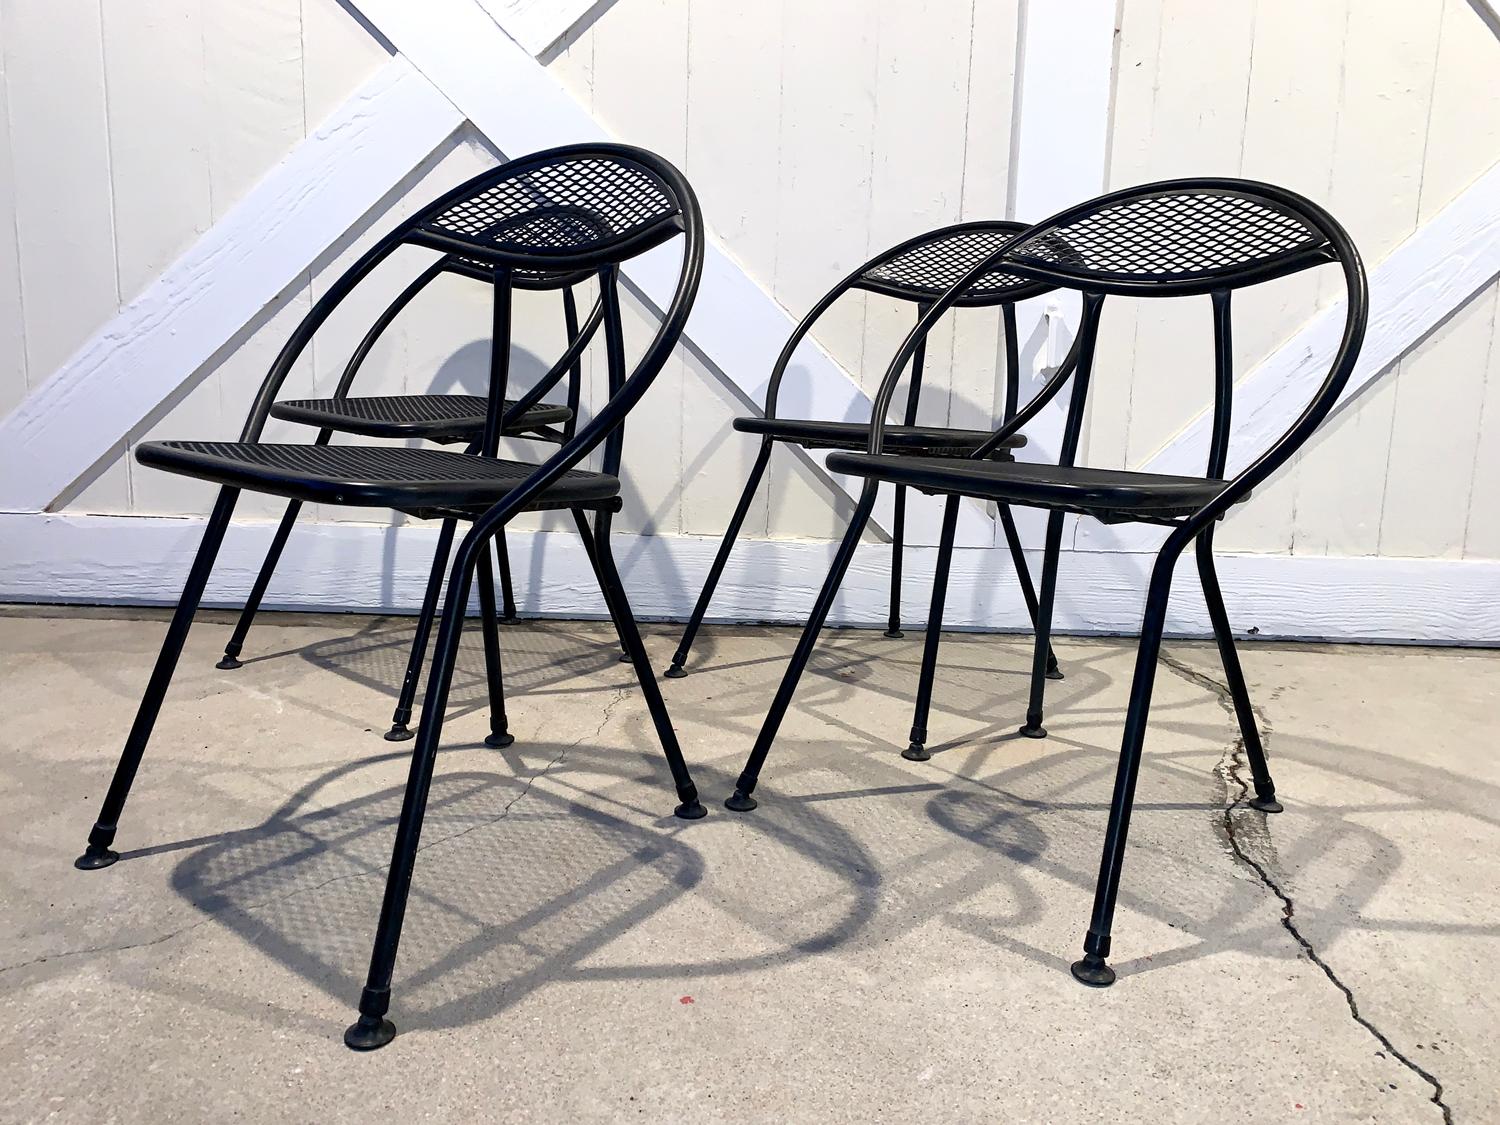 This is a Mid-Century Modern outdoor patio folding chairs designed by Salterini and sold in the USA by Rid-Jid. This listing includes a set of four chairs. The chairs are made of mesh and tubular steel. In very good vintage condition.
The chairs